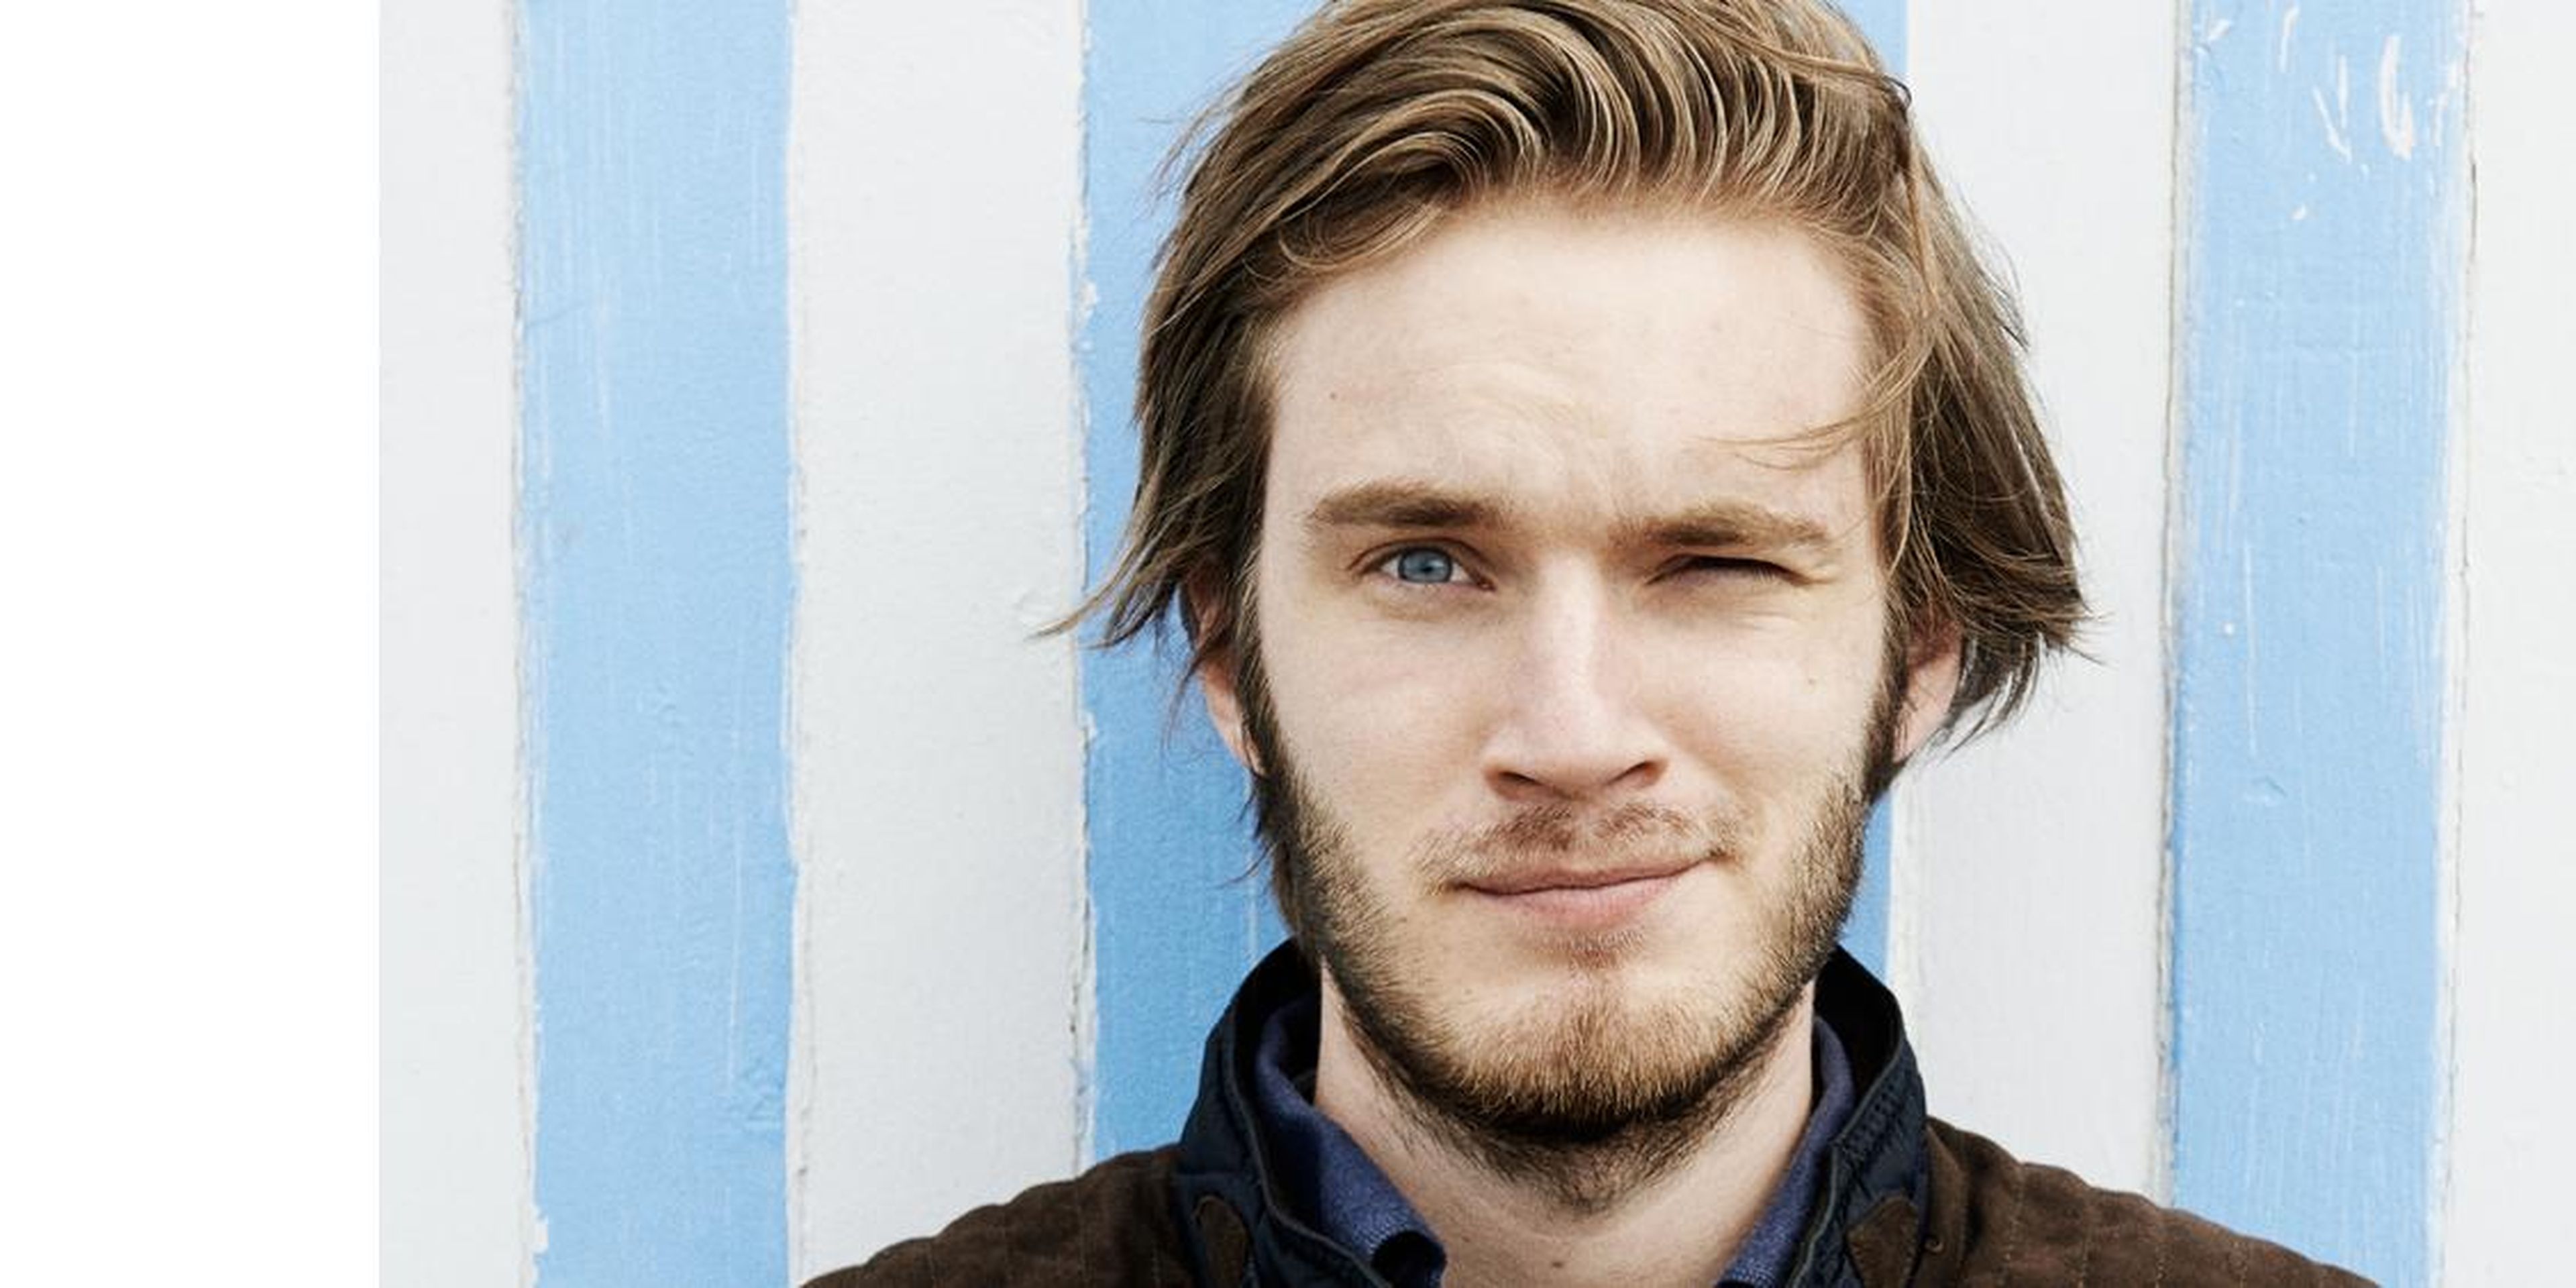 PewDiePie launched a YouTube channel and built a huge following.